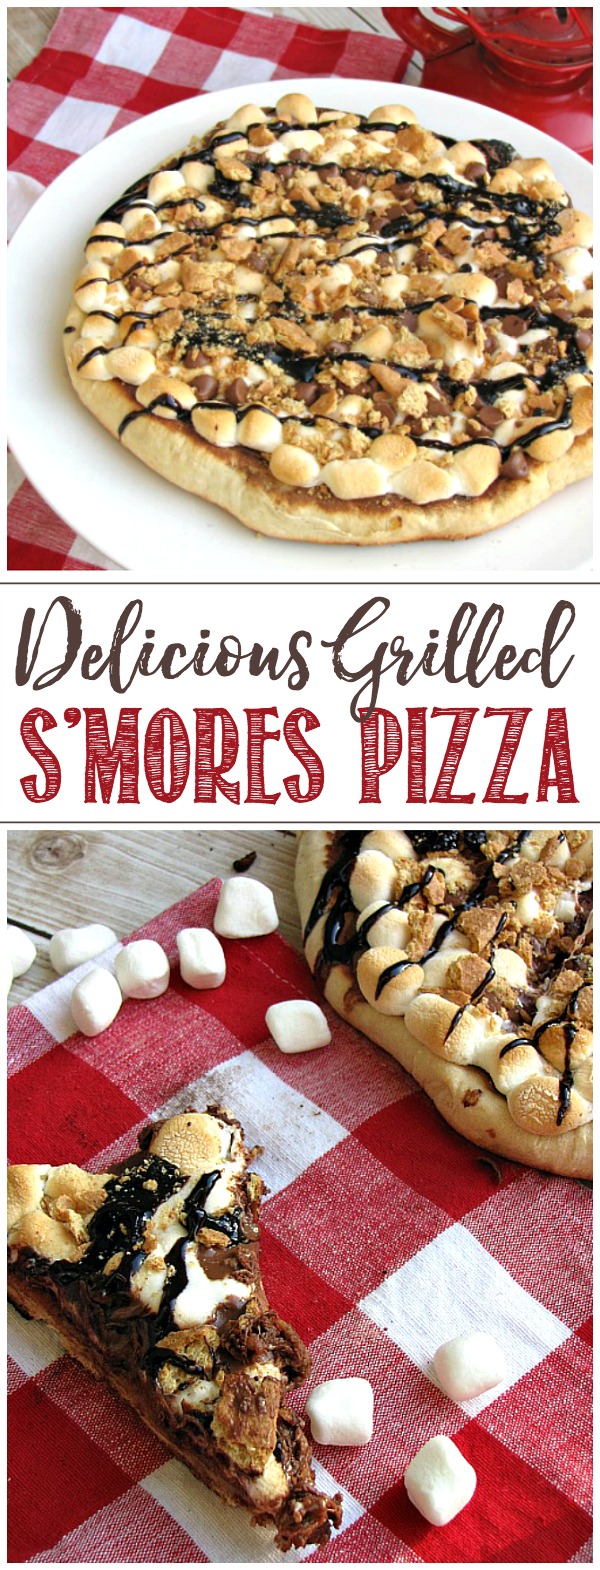 Grilled s'mores pizza. Refrigerated pizza dough grilled on the BBQ and topped with nutella, marshmallows, graham crackers and drizzled with chocolate sauce.